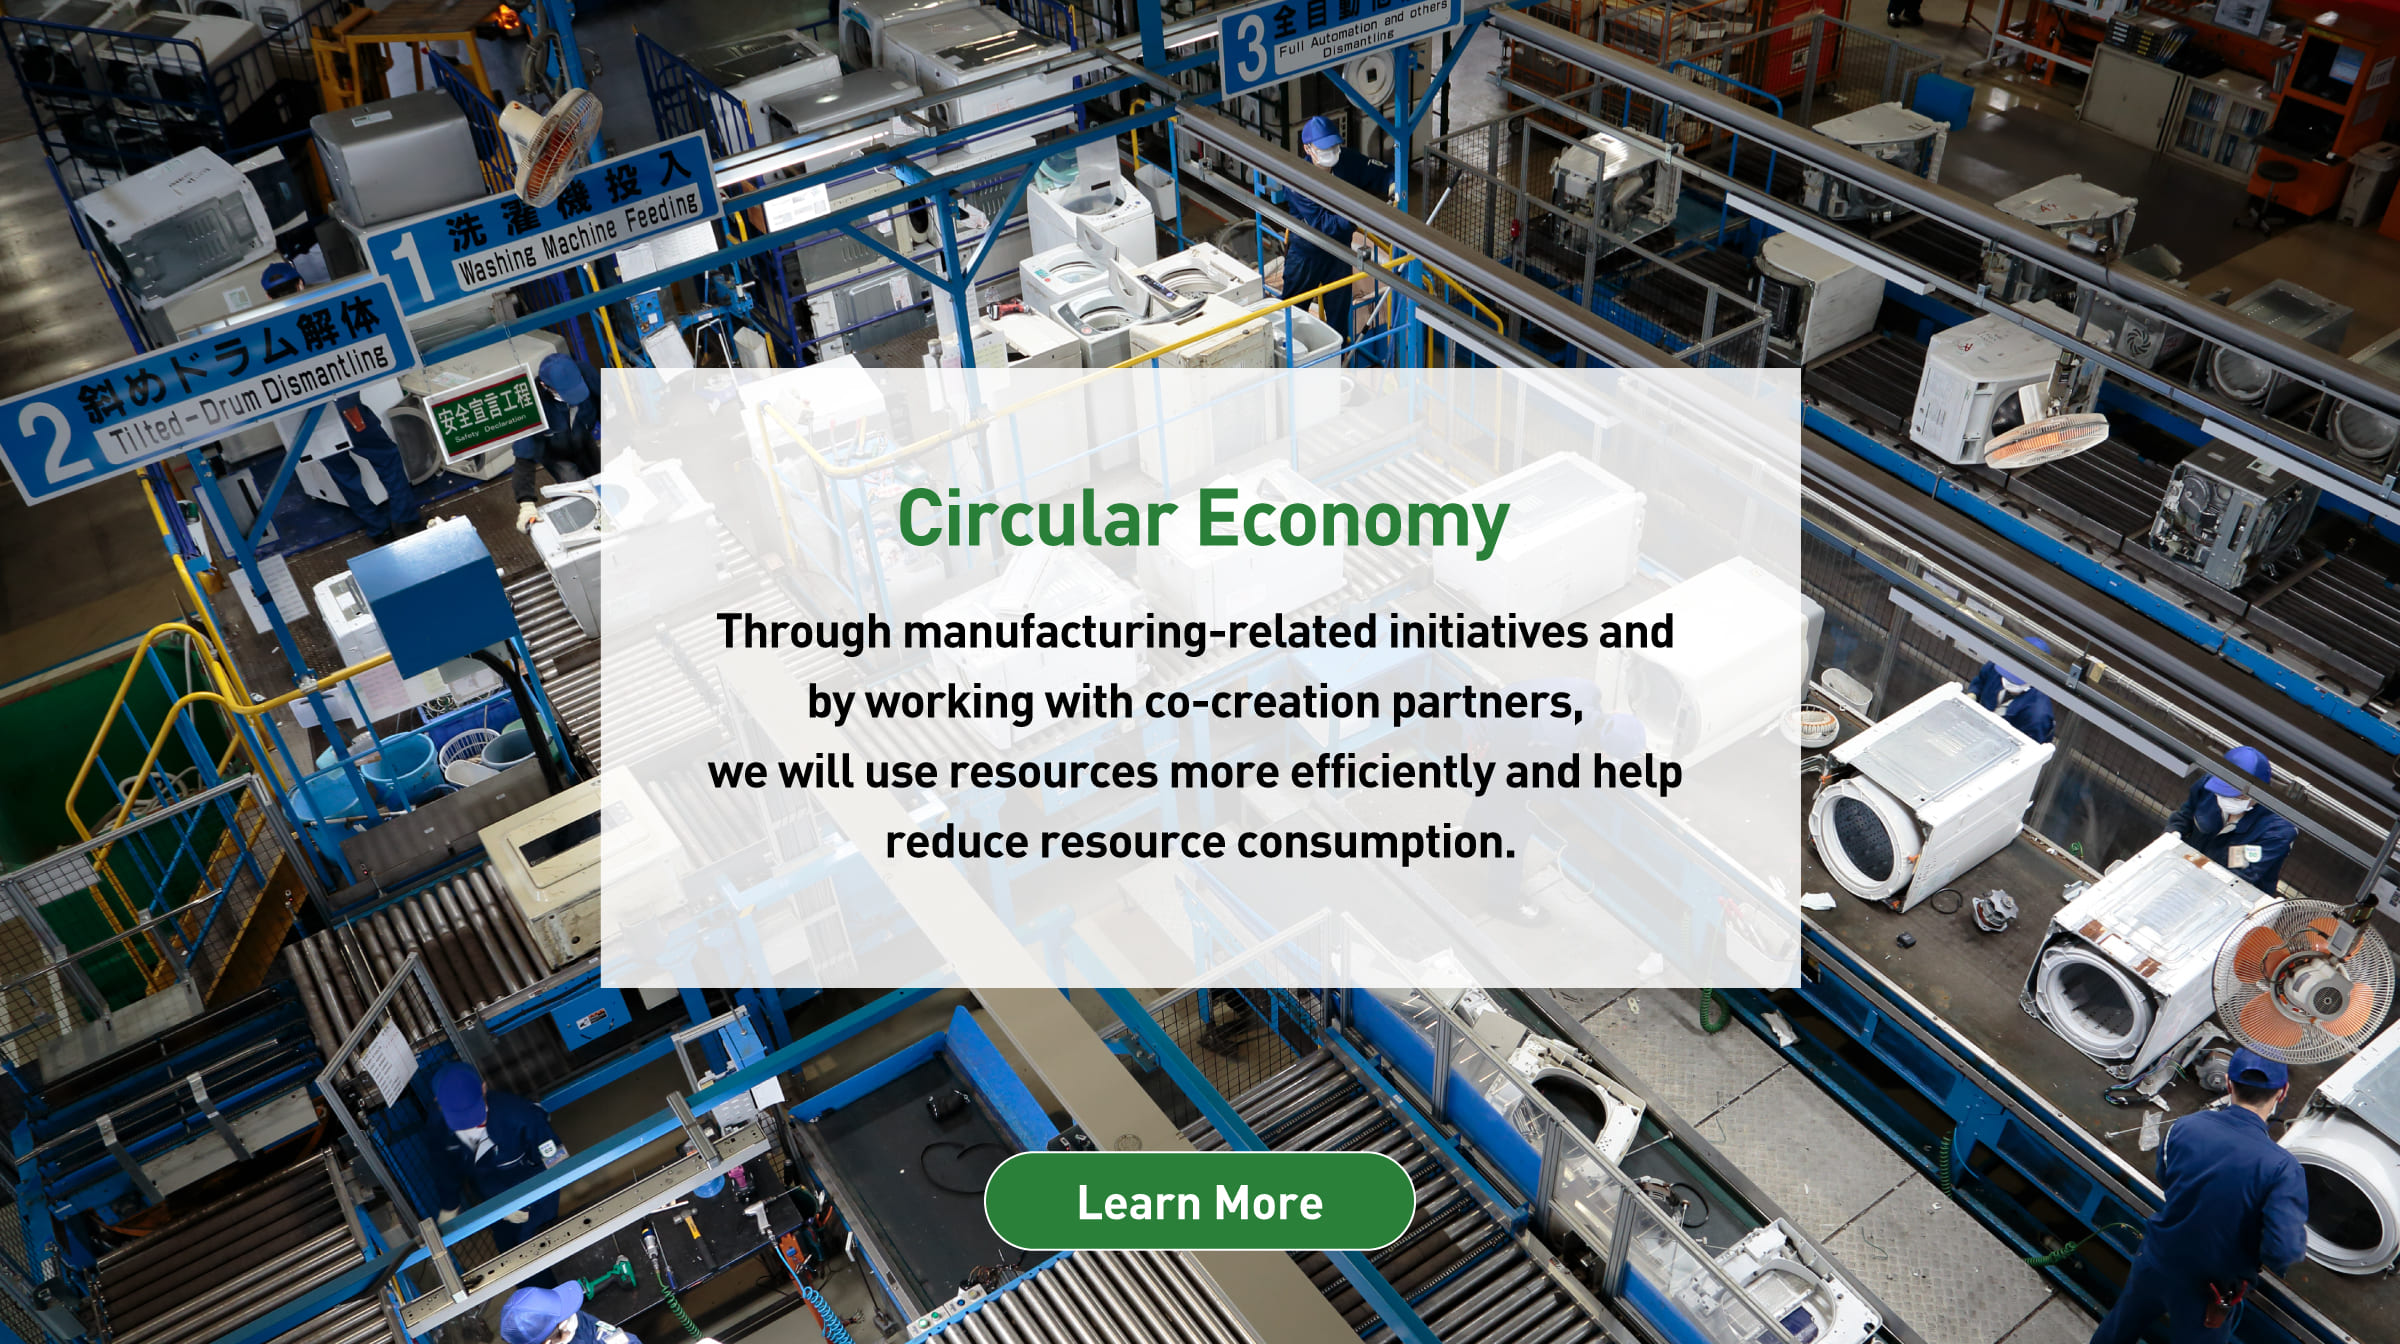 Circular Economy Through manufacturing-related initiatives and by working with co-creation partners, we will use resources more efficiently and help reduce resource consumption. Learn More 